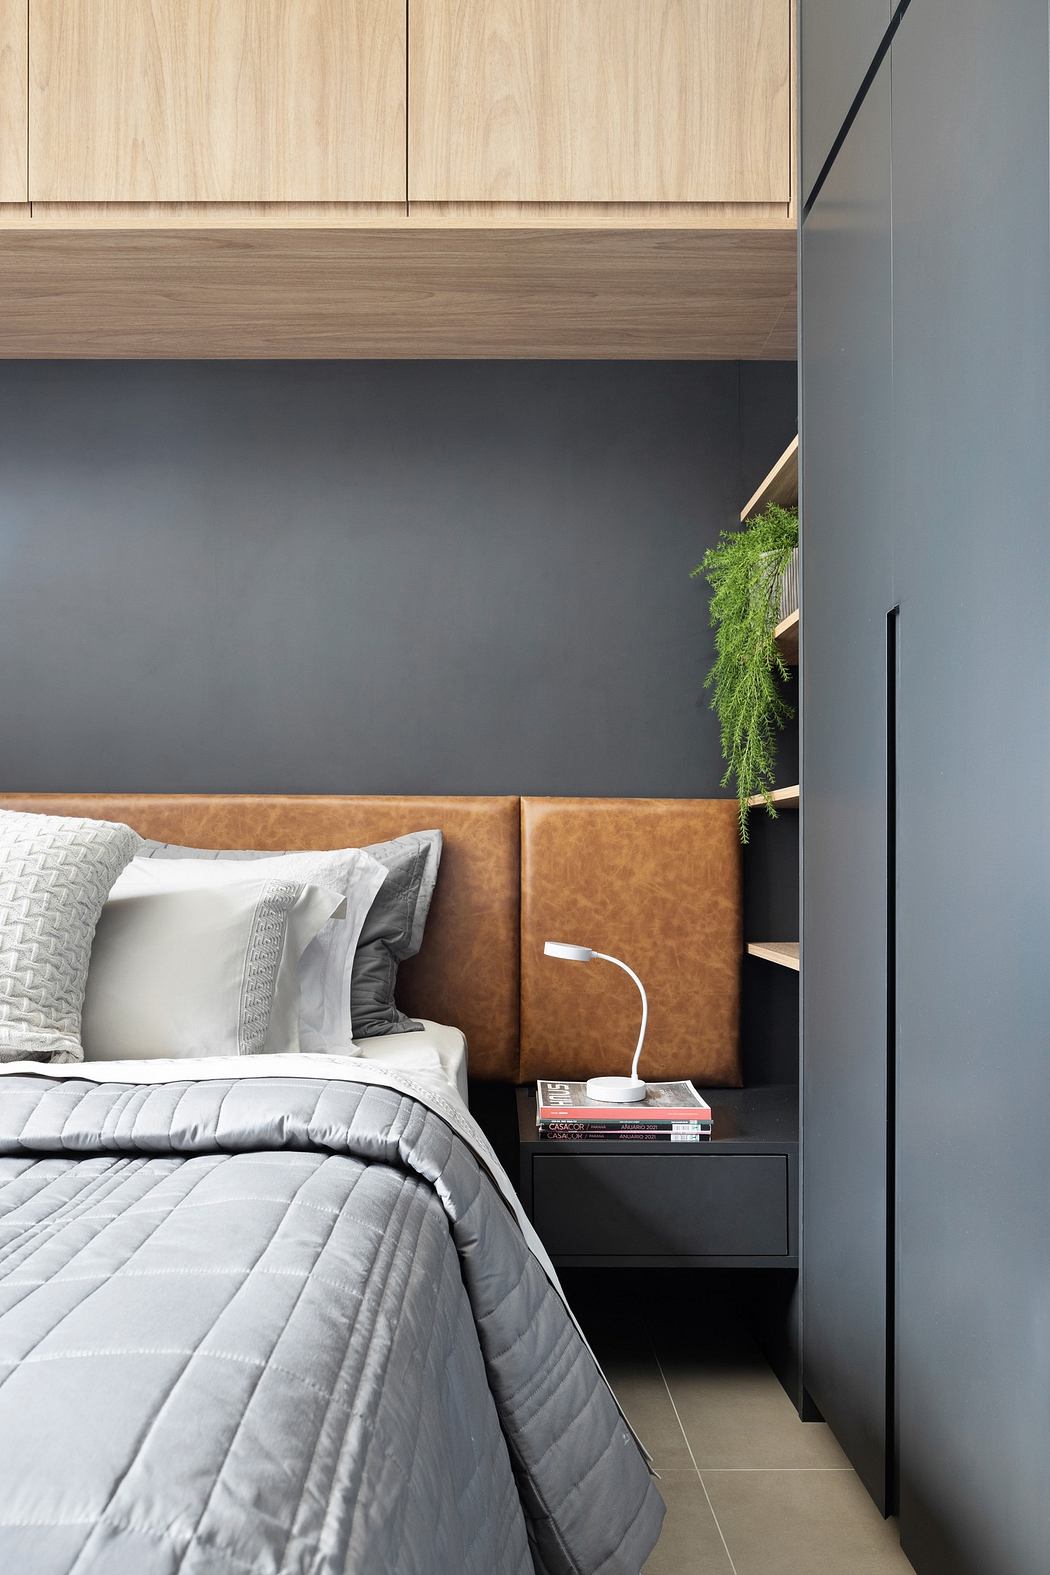 Contemporary bedroom with sleek grey bedding, tan headboard, and wooden accents.